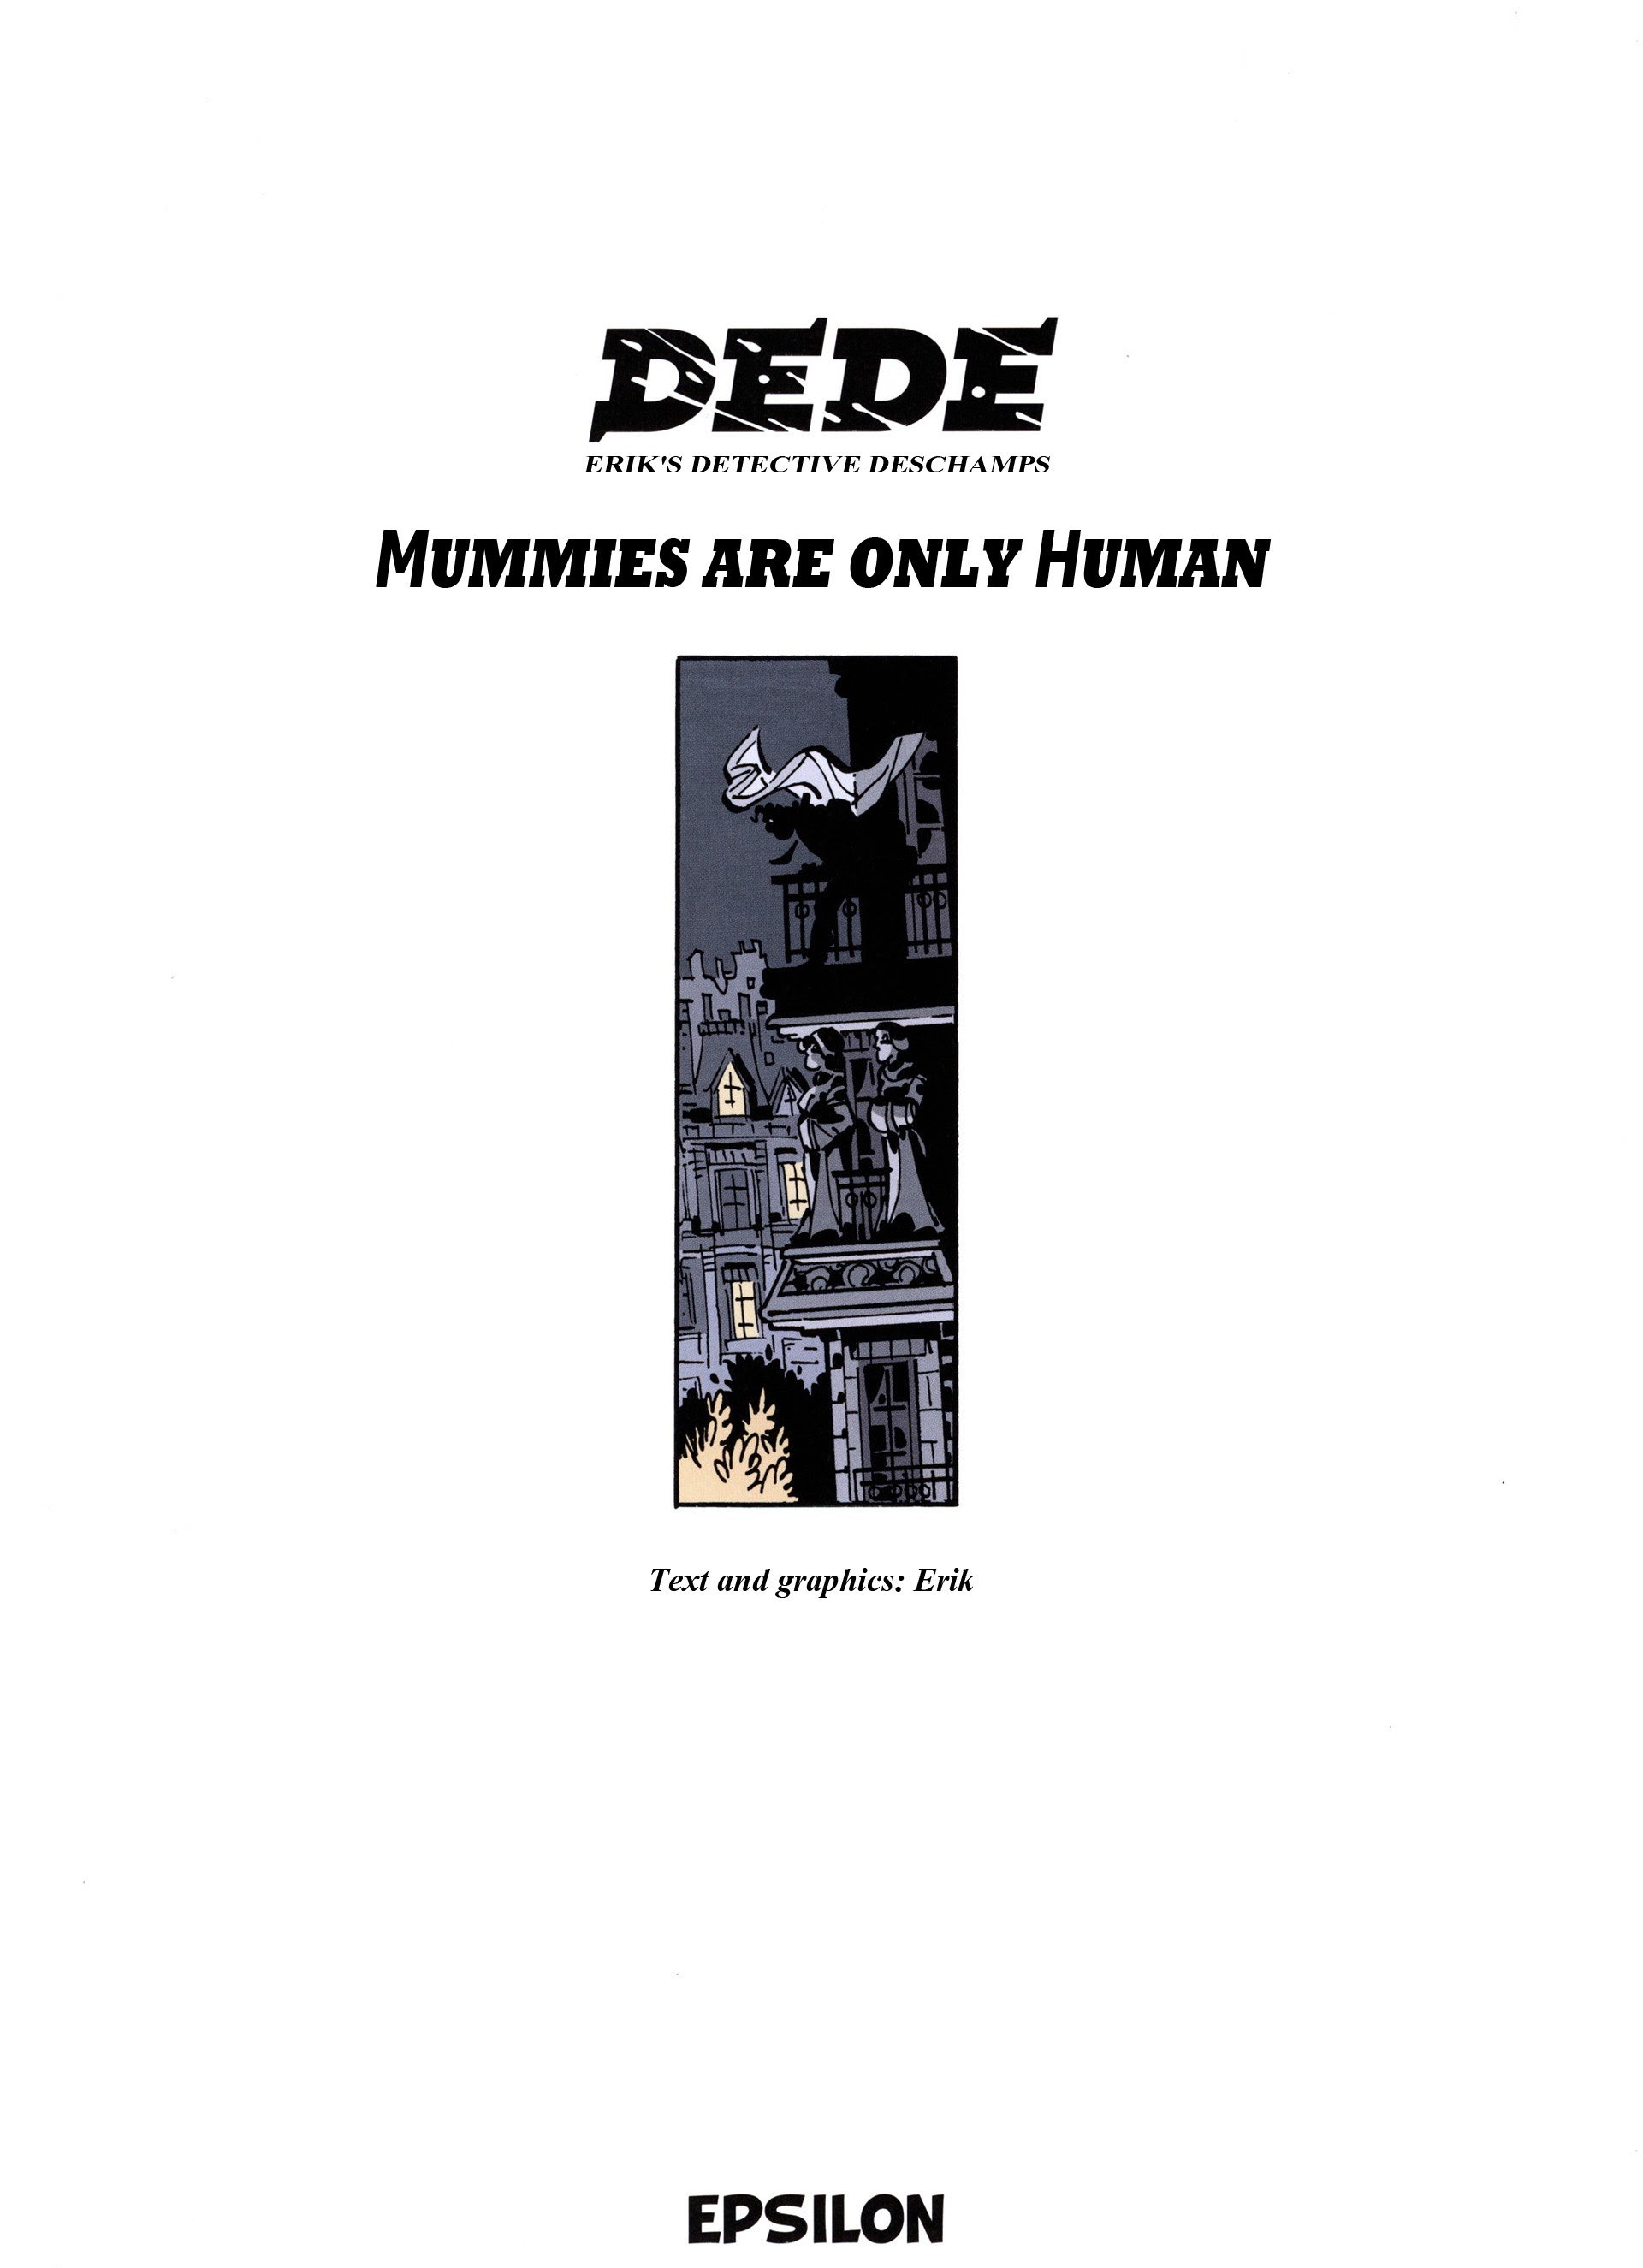 Read online Dede comic -  Issue #3 - 4